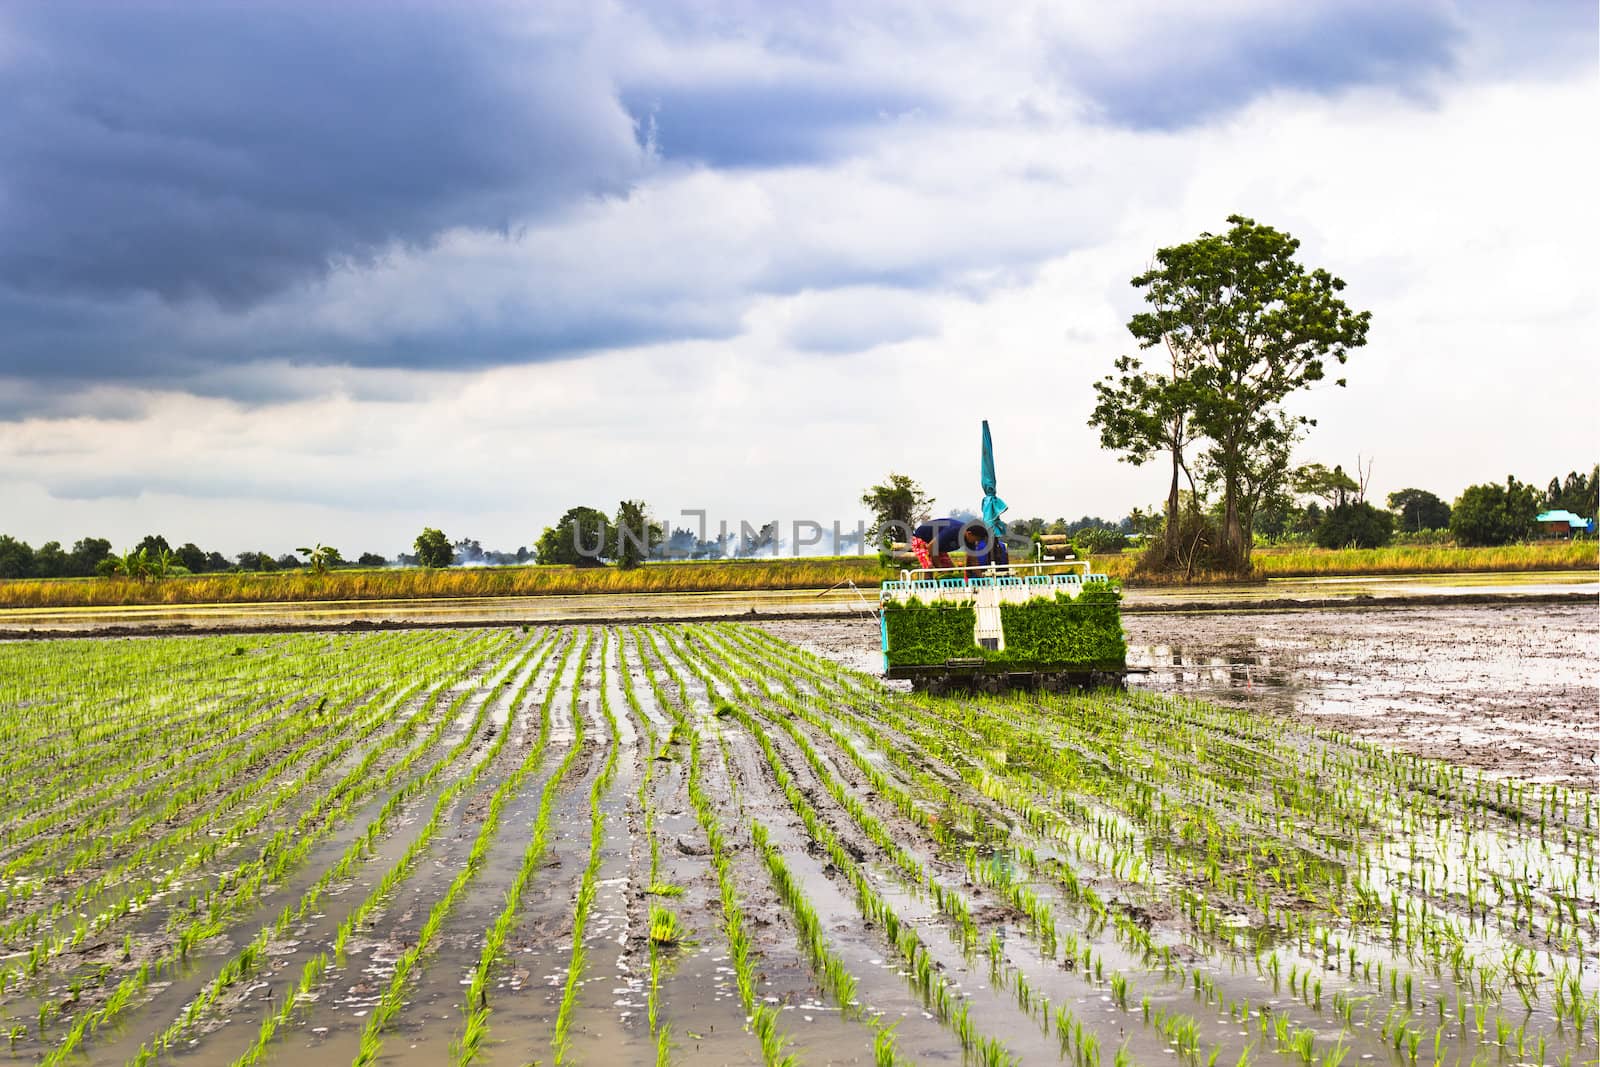 Rice field, the main agriculture of Thailand